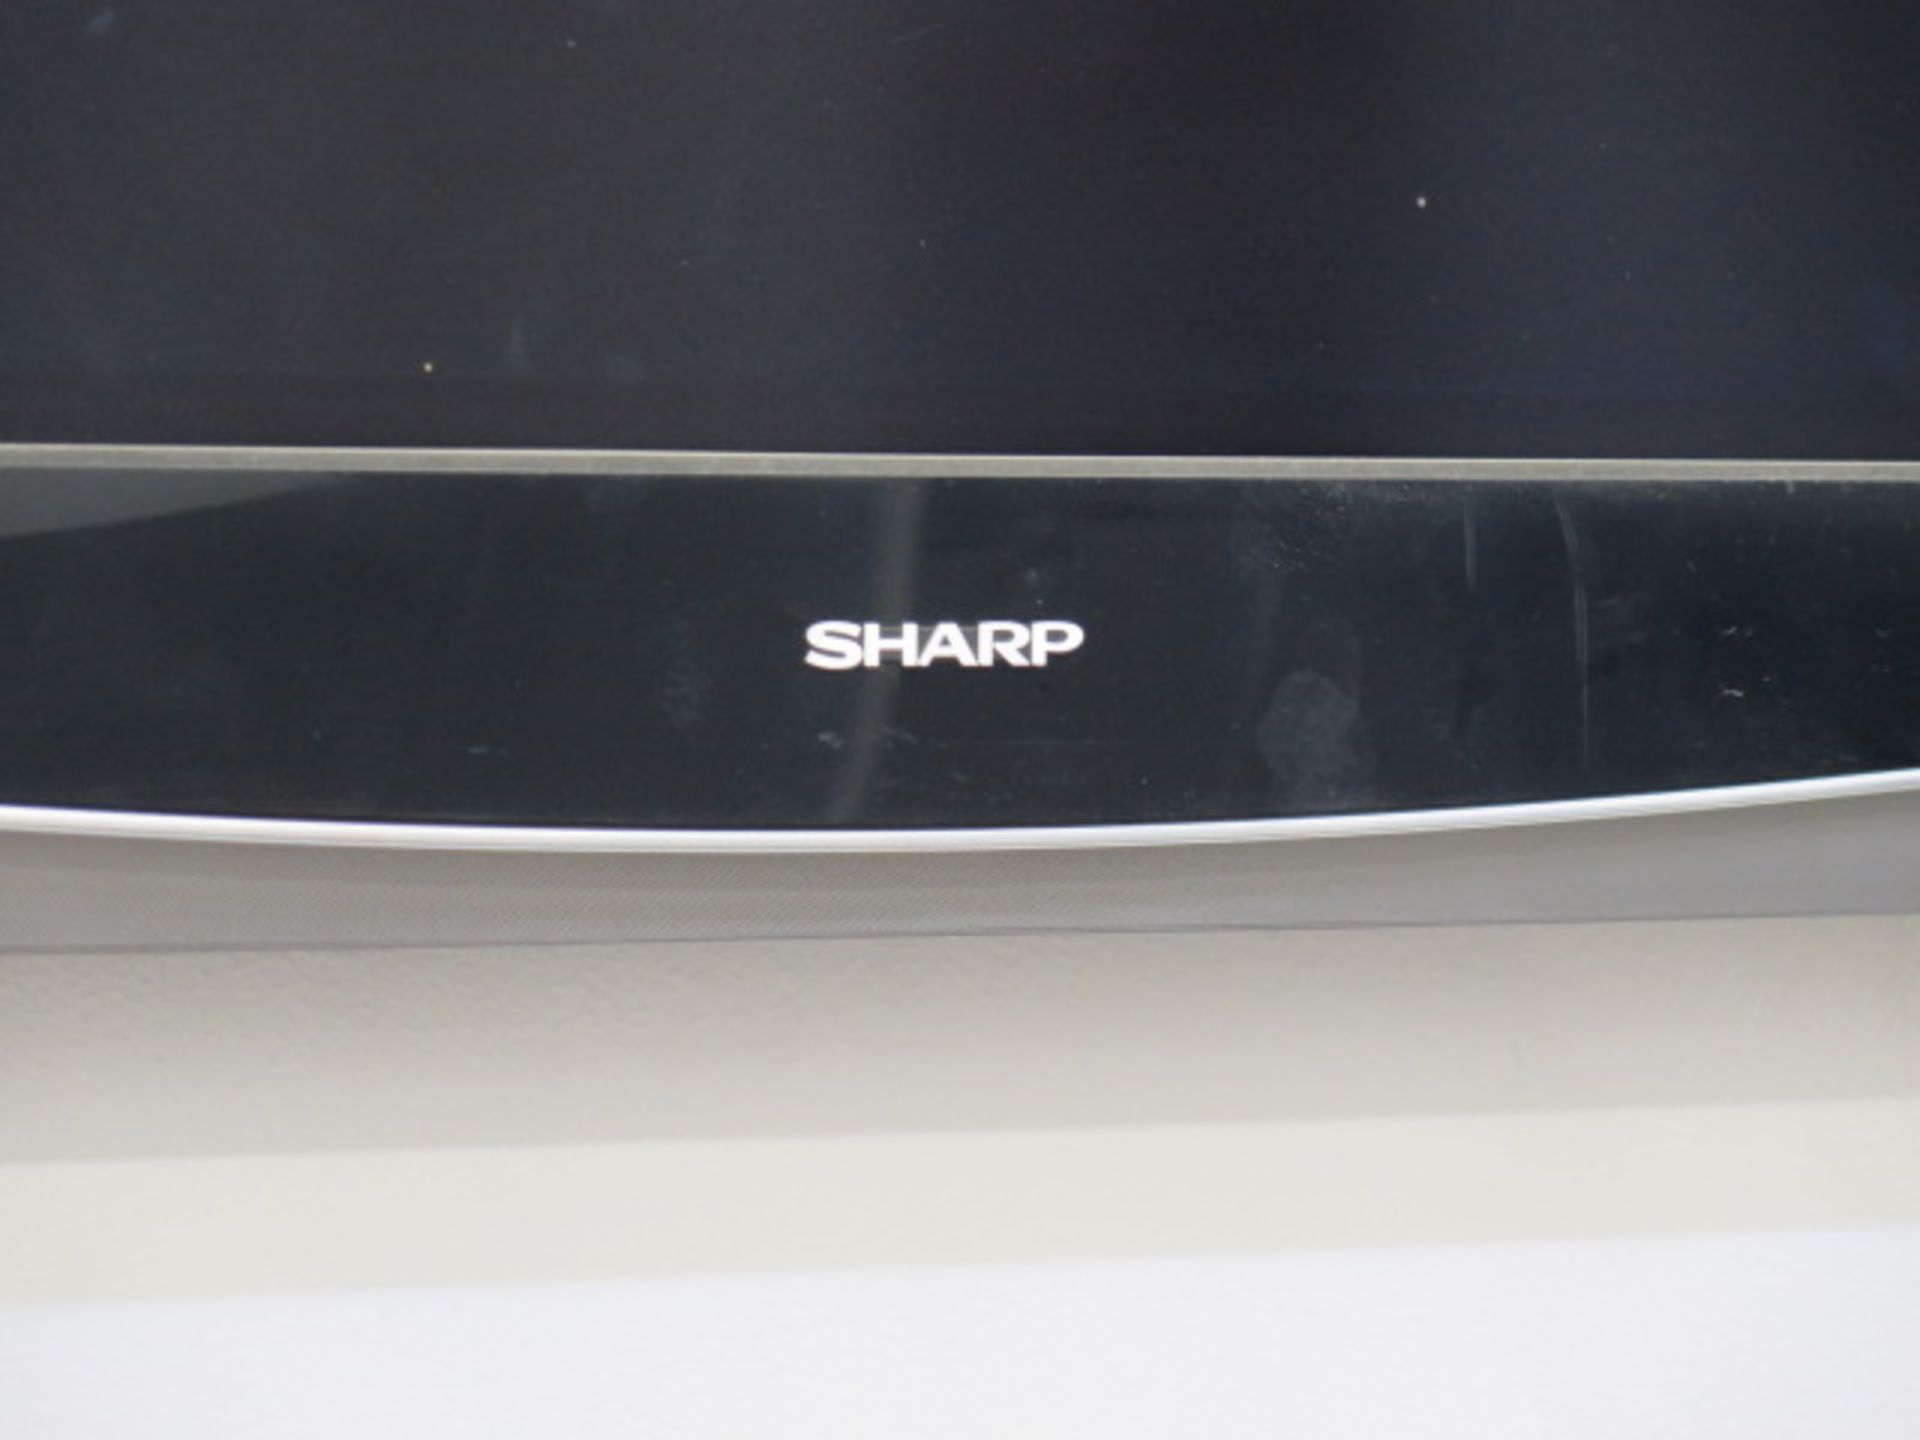 Sharp 52" TV (SOLD AS-IS - NO WARRANTY) - Image 2 of 3